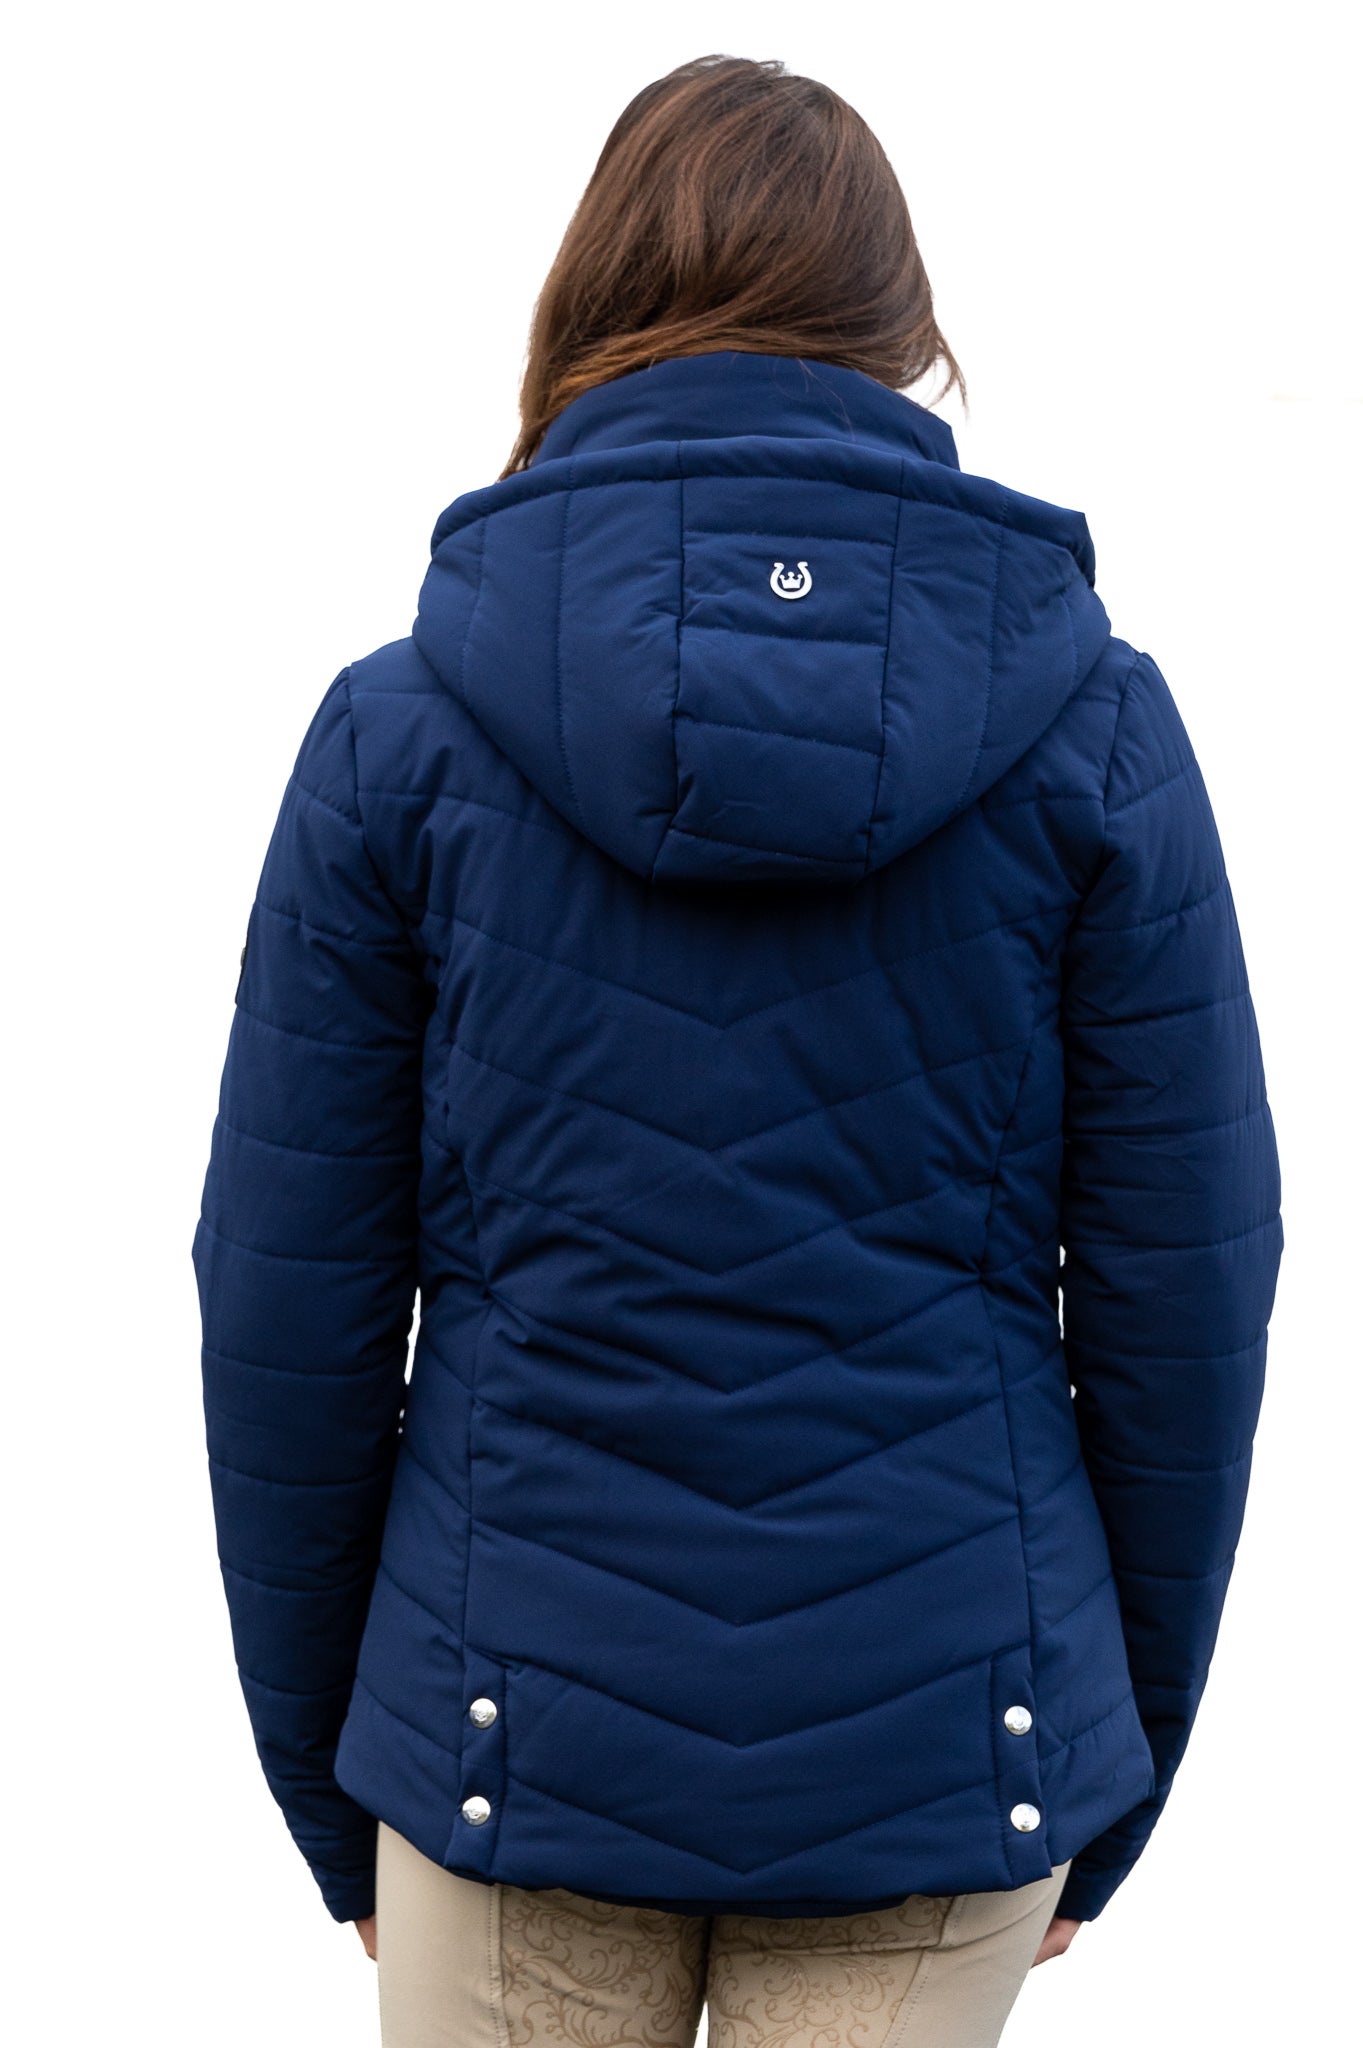 The Whistler winter jacket - FINAL SALE